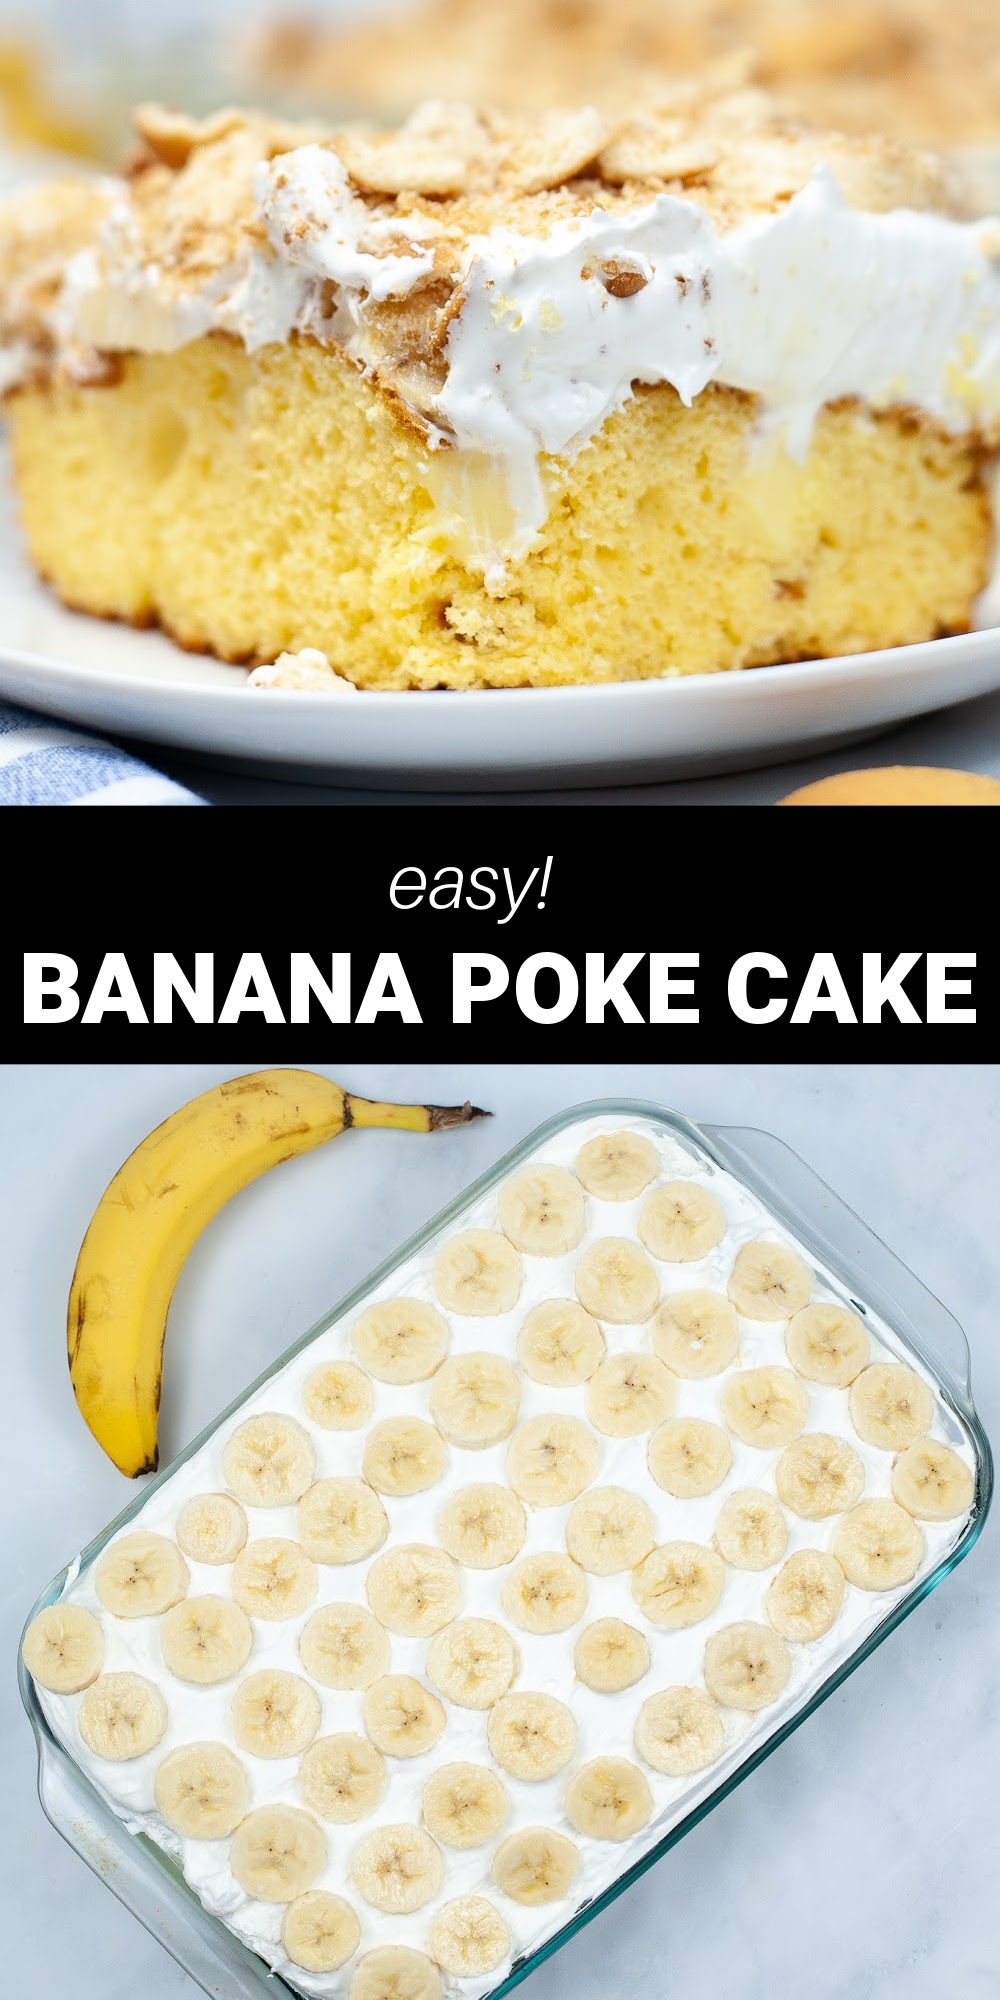 This is the BEST Banana Pudding Poke Cake you’ll ever try. Fluffy yellow cake with creamy banana pudding is layered with freshly sliced bananas, vanilla wafers and whipped topping.